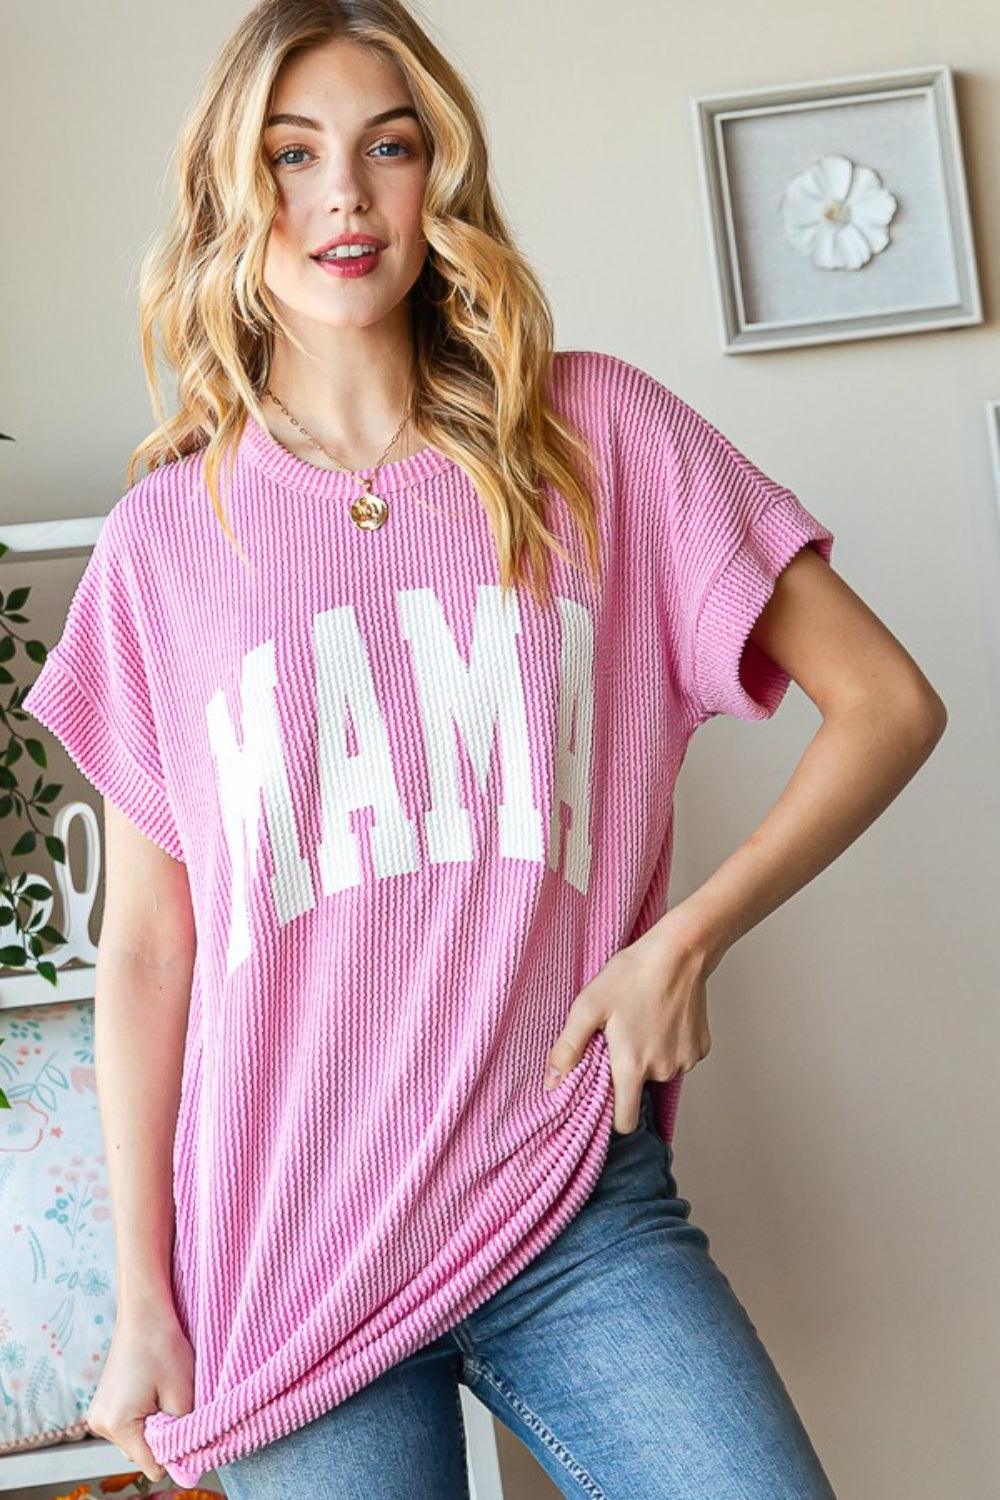 Heimish Full Size Letter Graphic Short Sleeve T-Shirt Pink Shirts & Tops